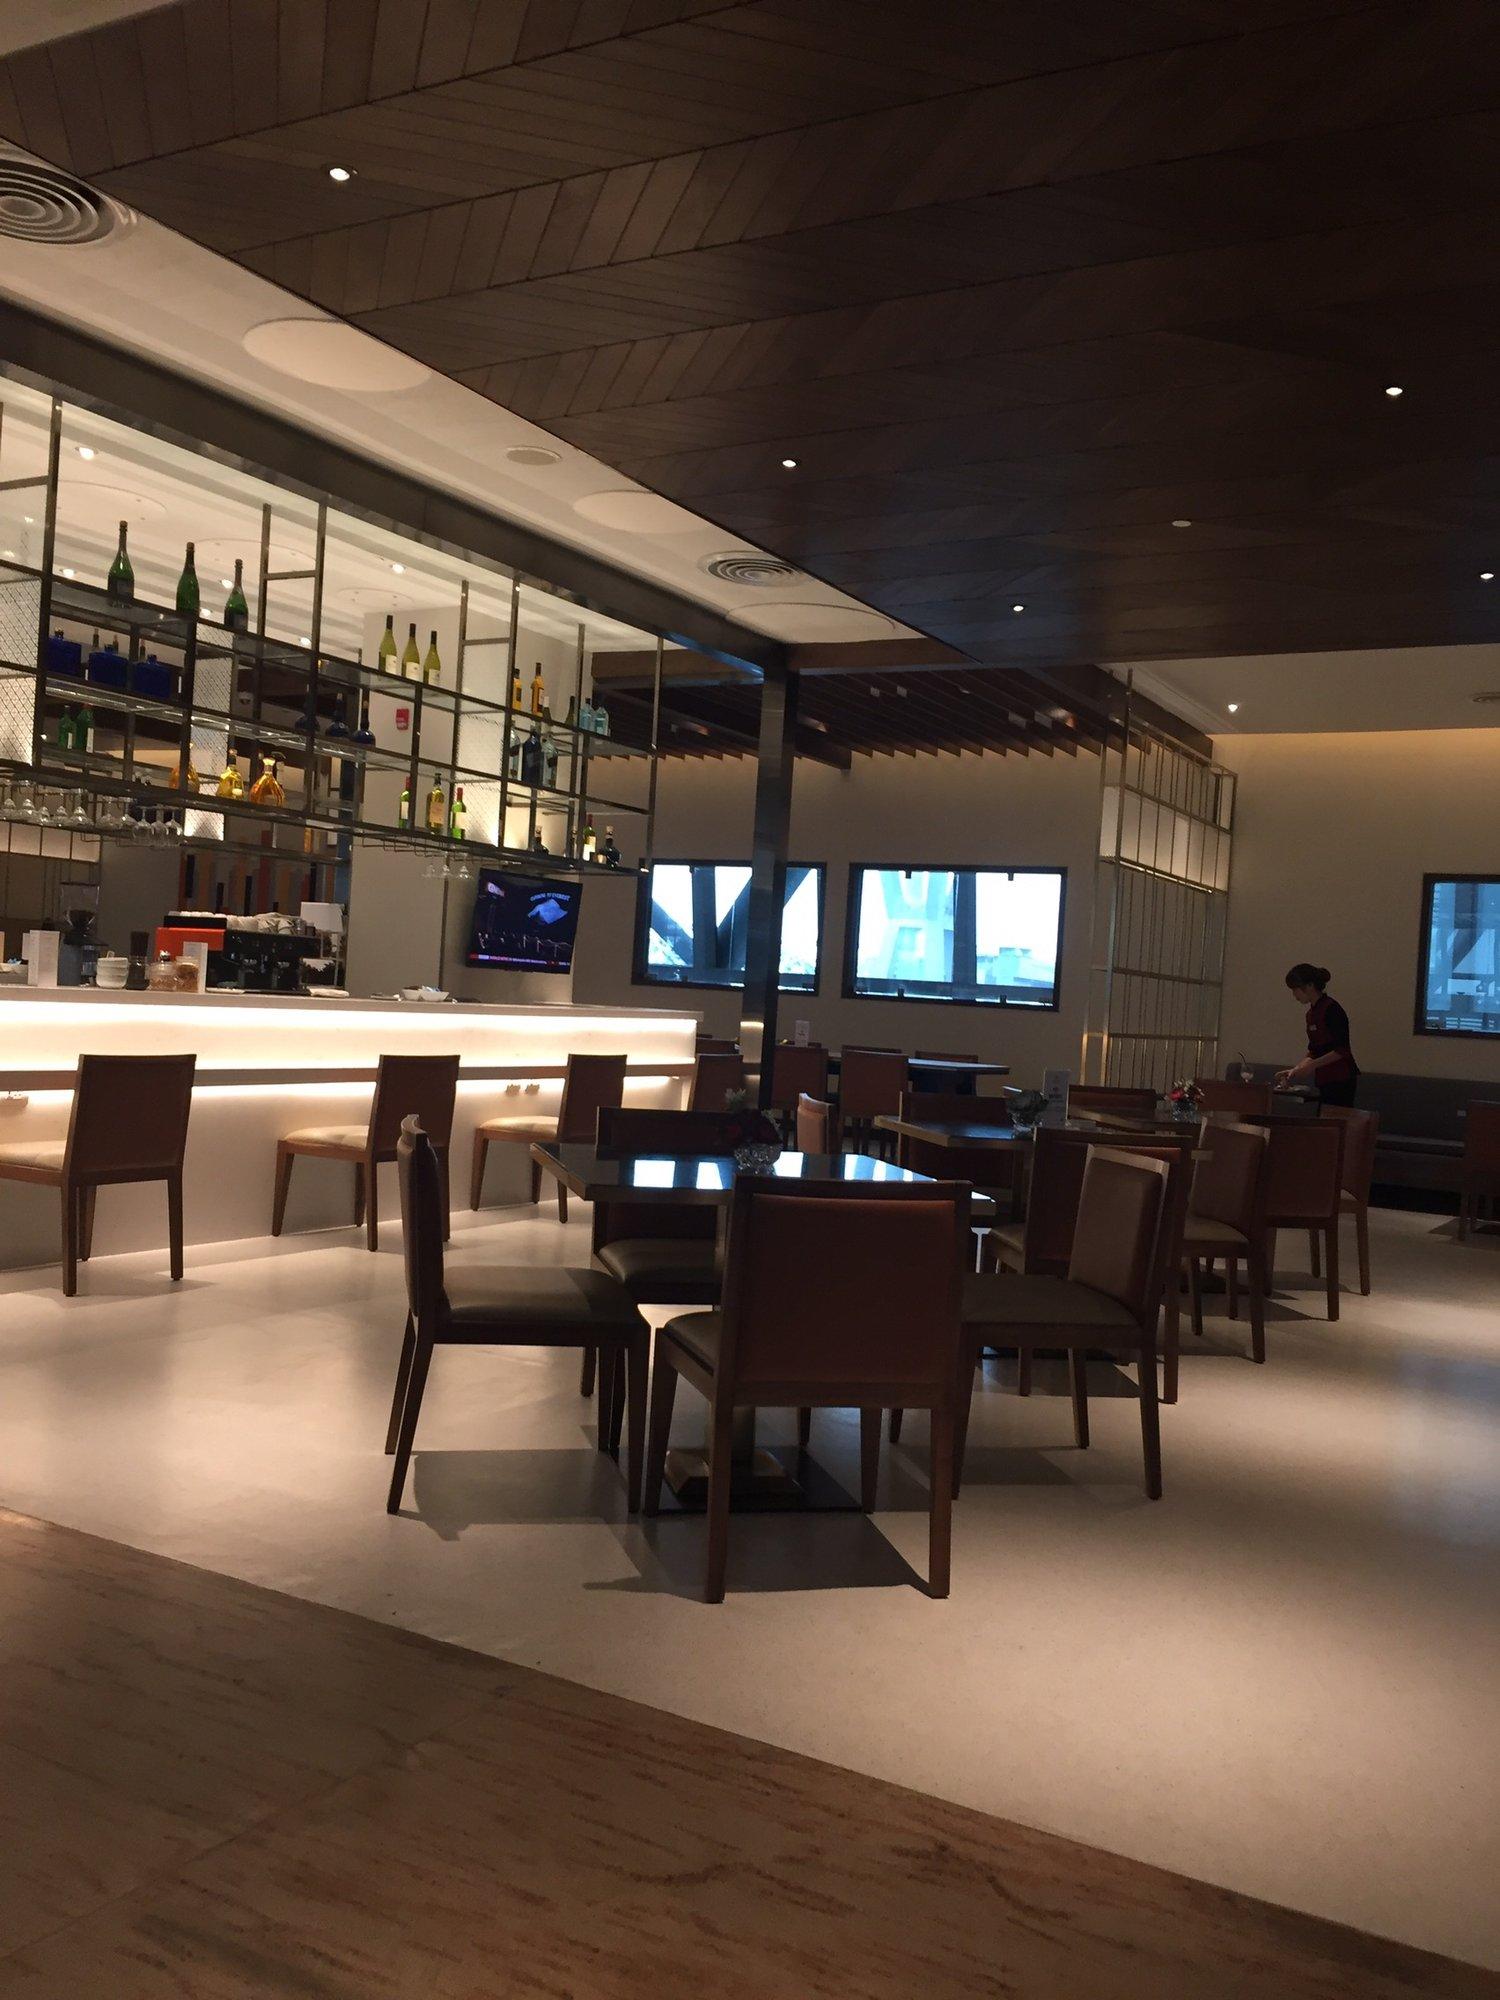 Singapore Airlines SilverKris Business Class Lounge image 14 of 16